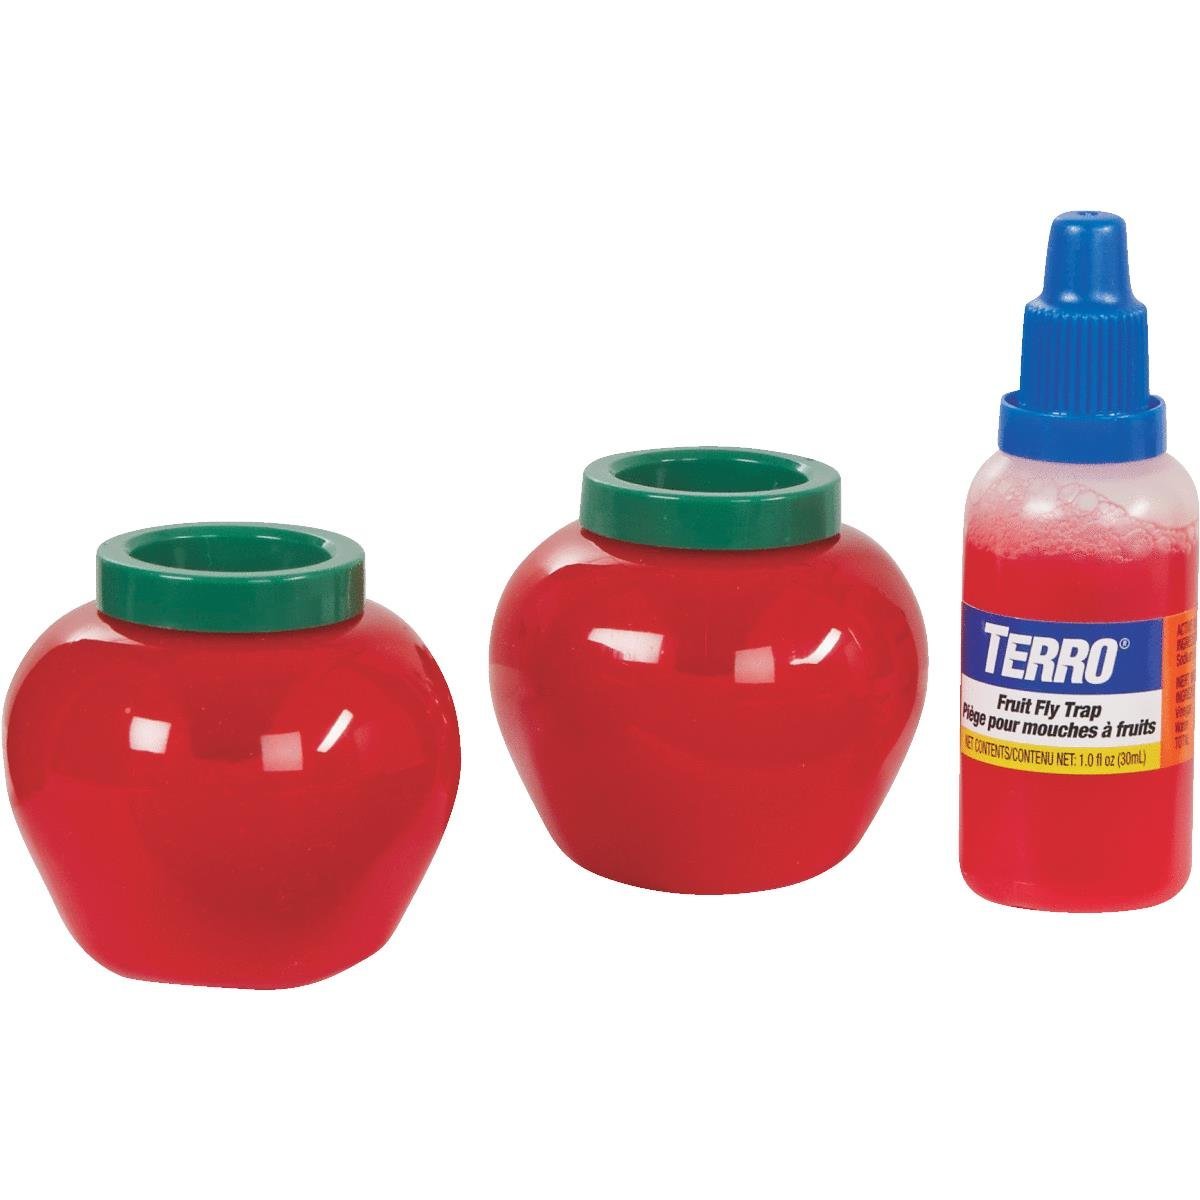 Terro Fruit Fly Trap – 2 Pack